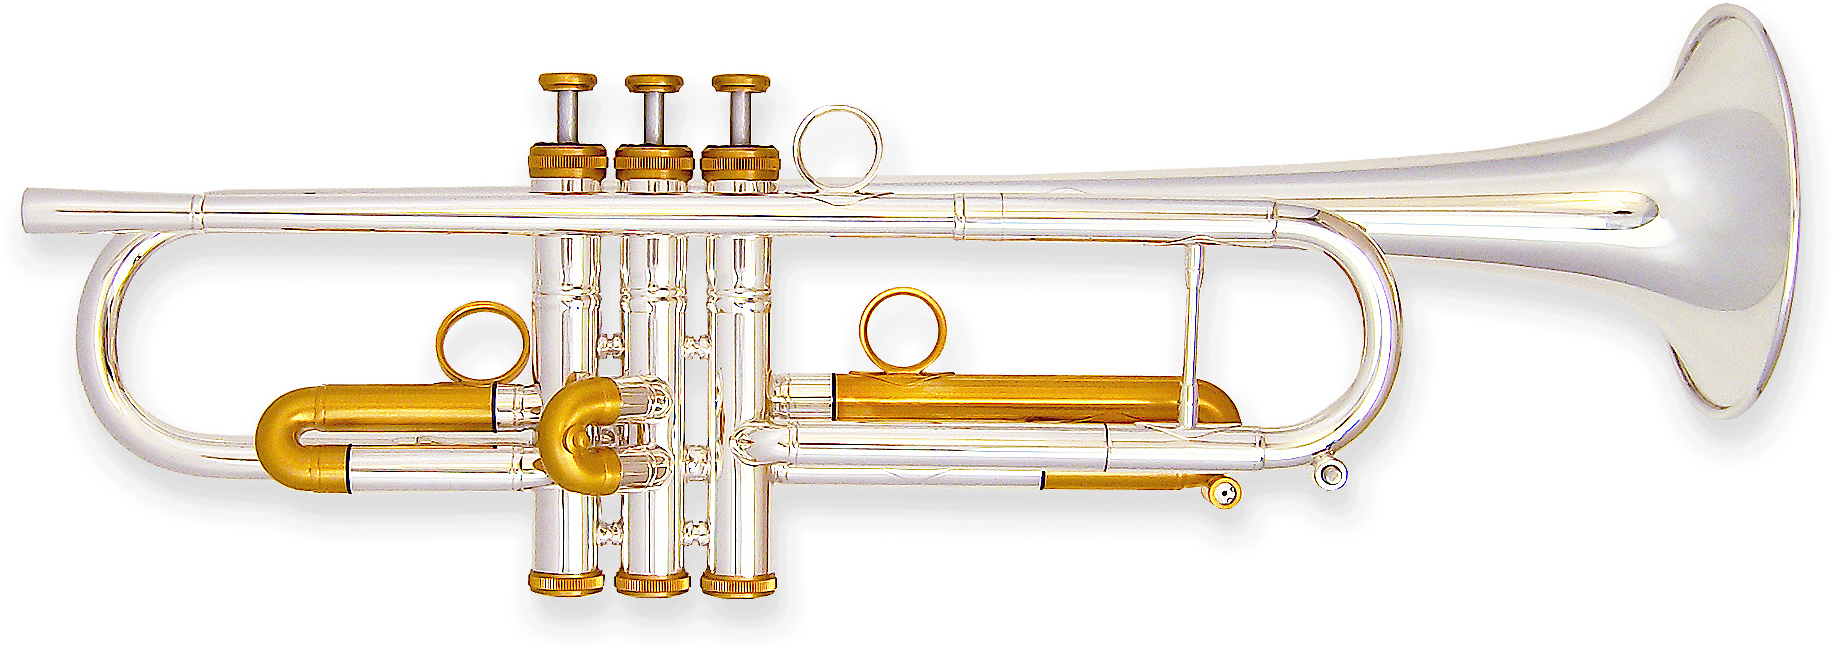 Silverand Gold Trumpet PNG